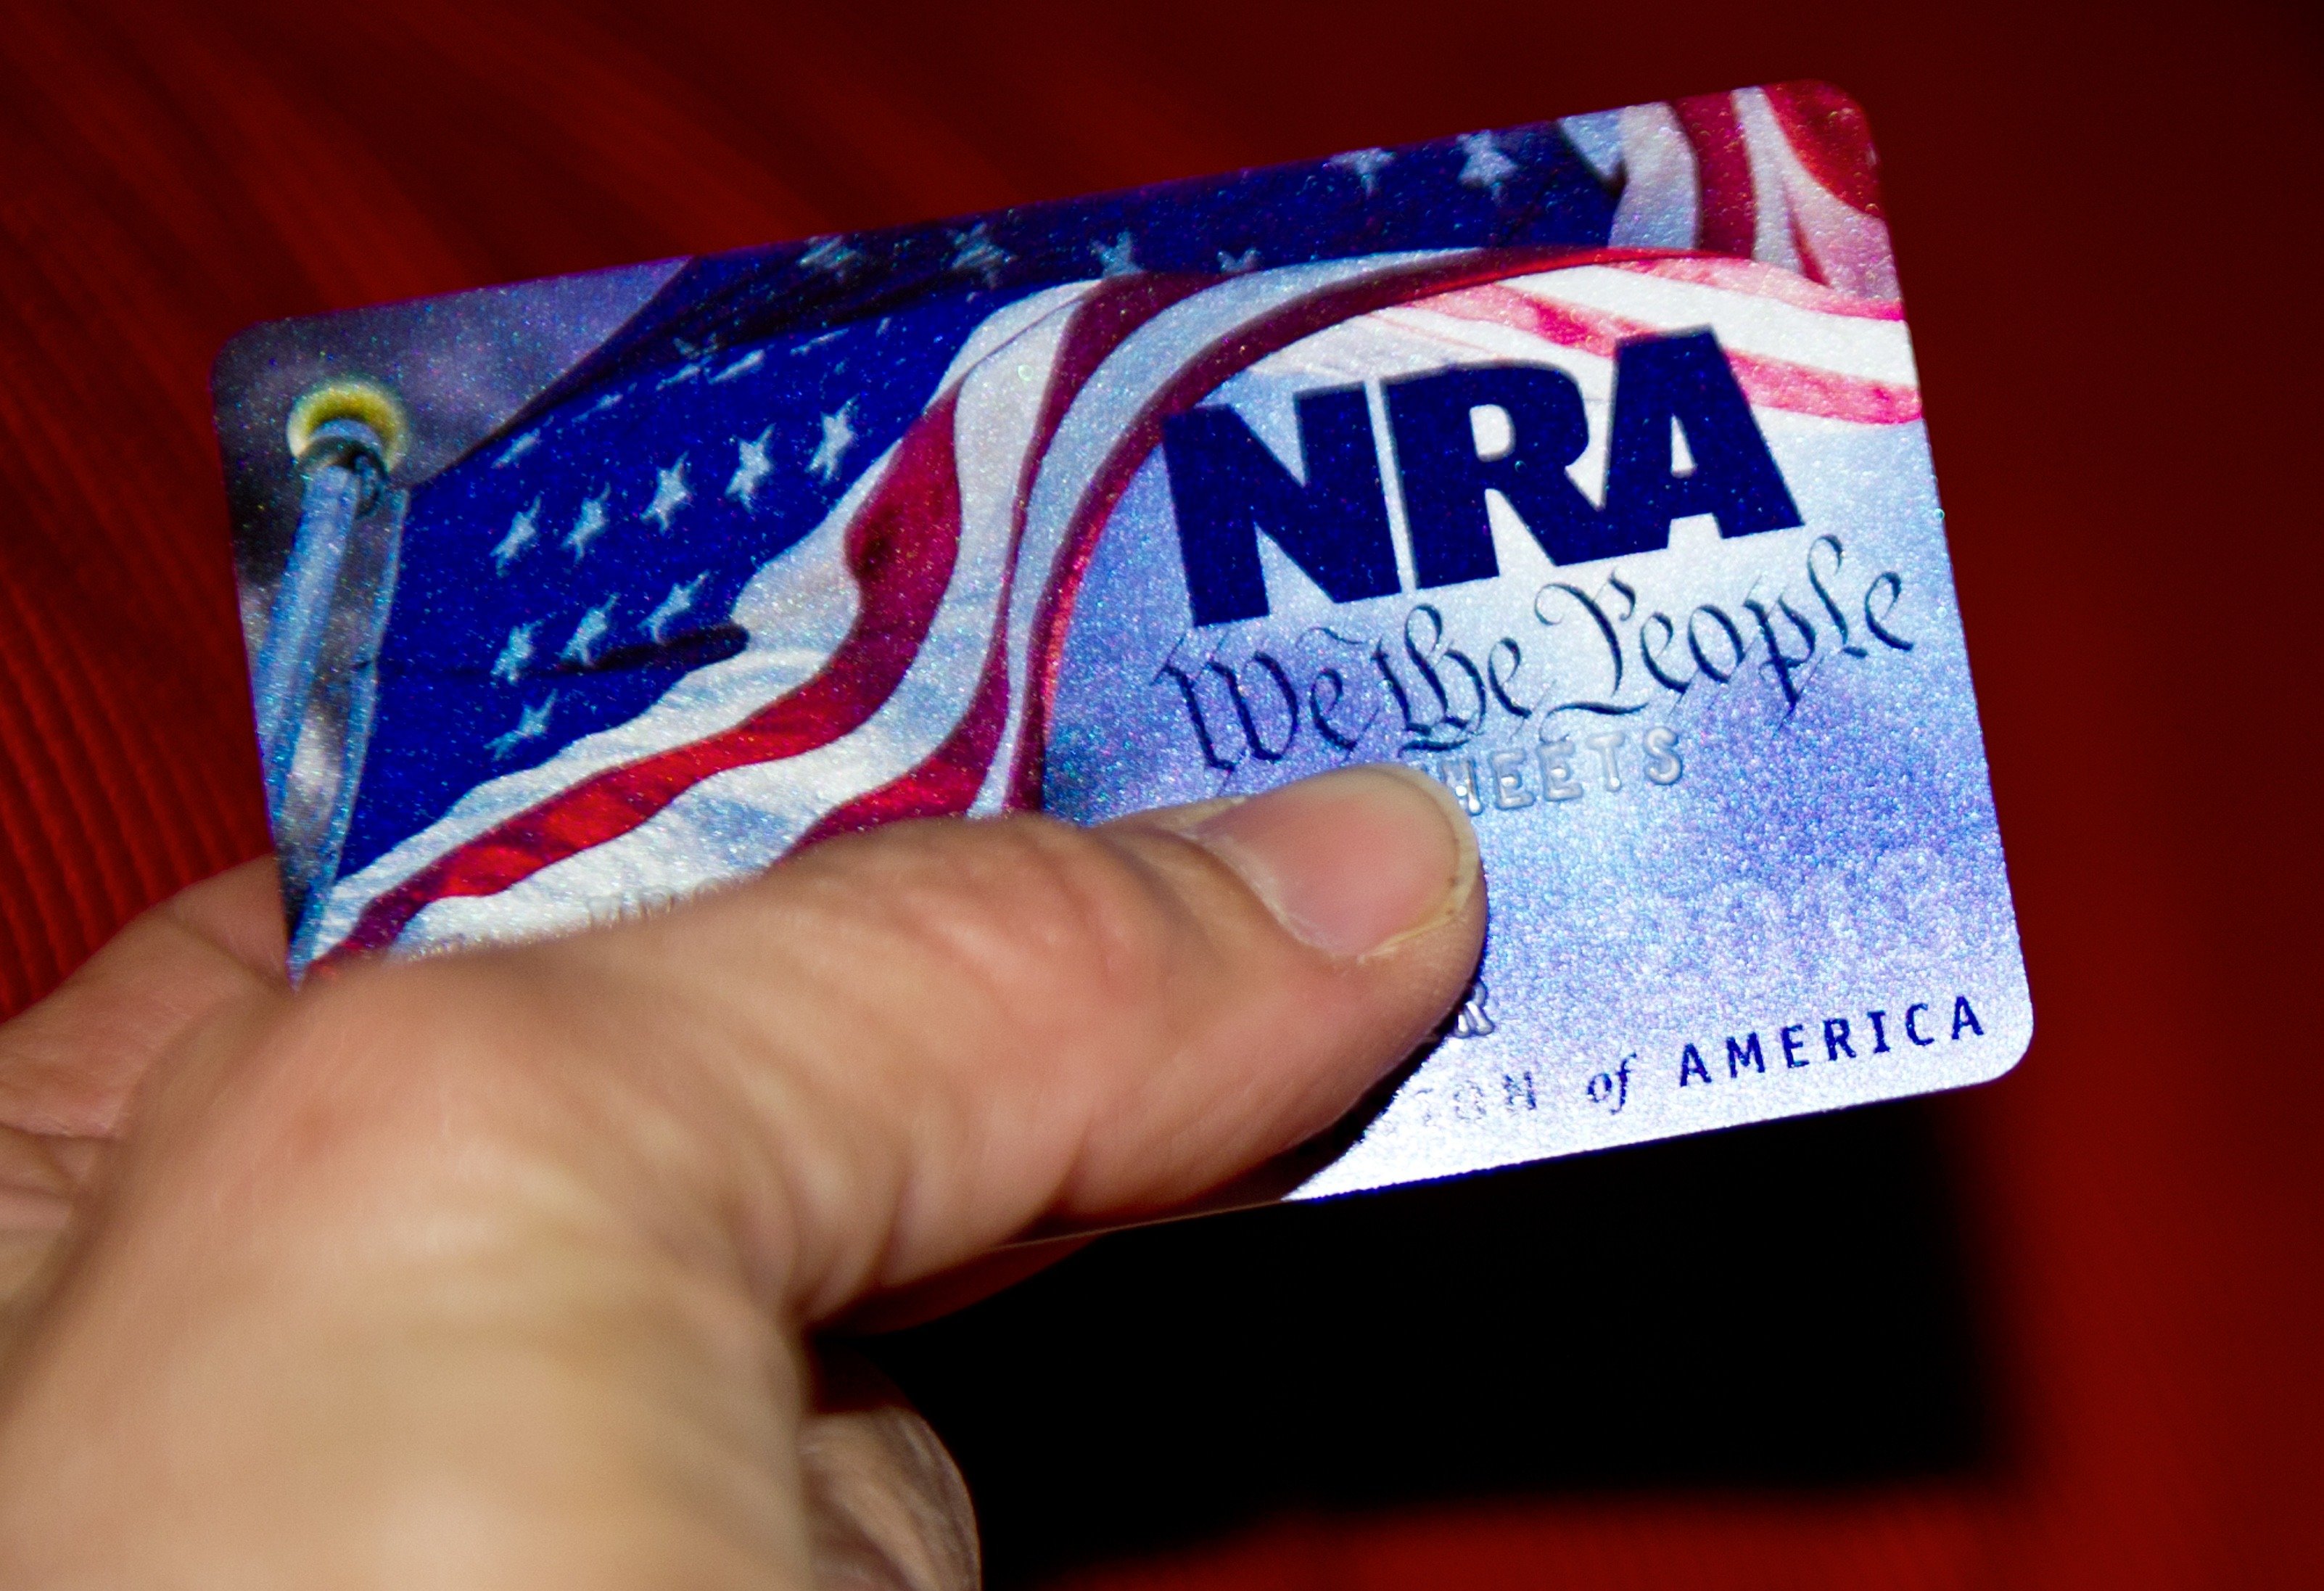 A membership card for the National Rifle Association (NRA) is seen on January 10, 2013 in Manassas, Virginia. (KAREN BLEIER/AFP/Getty Images)